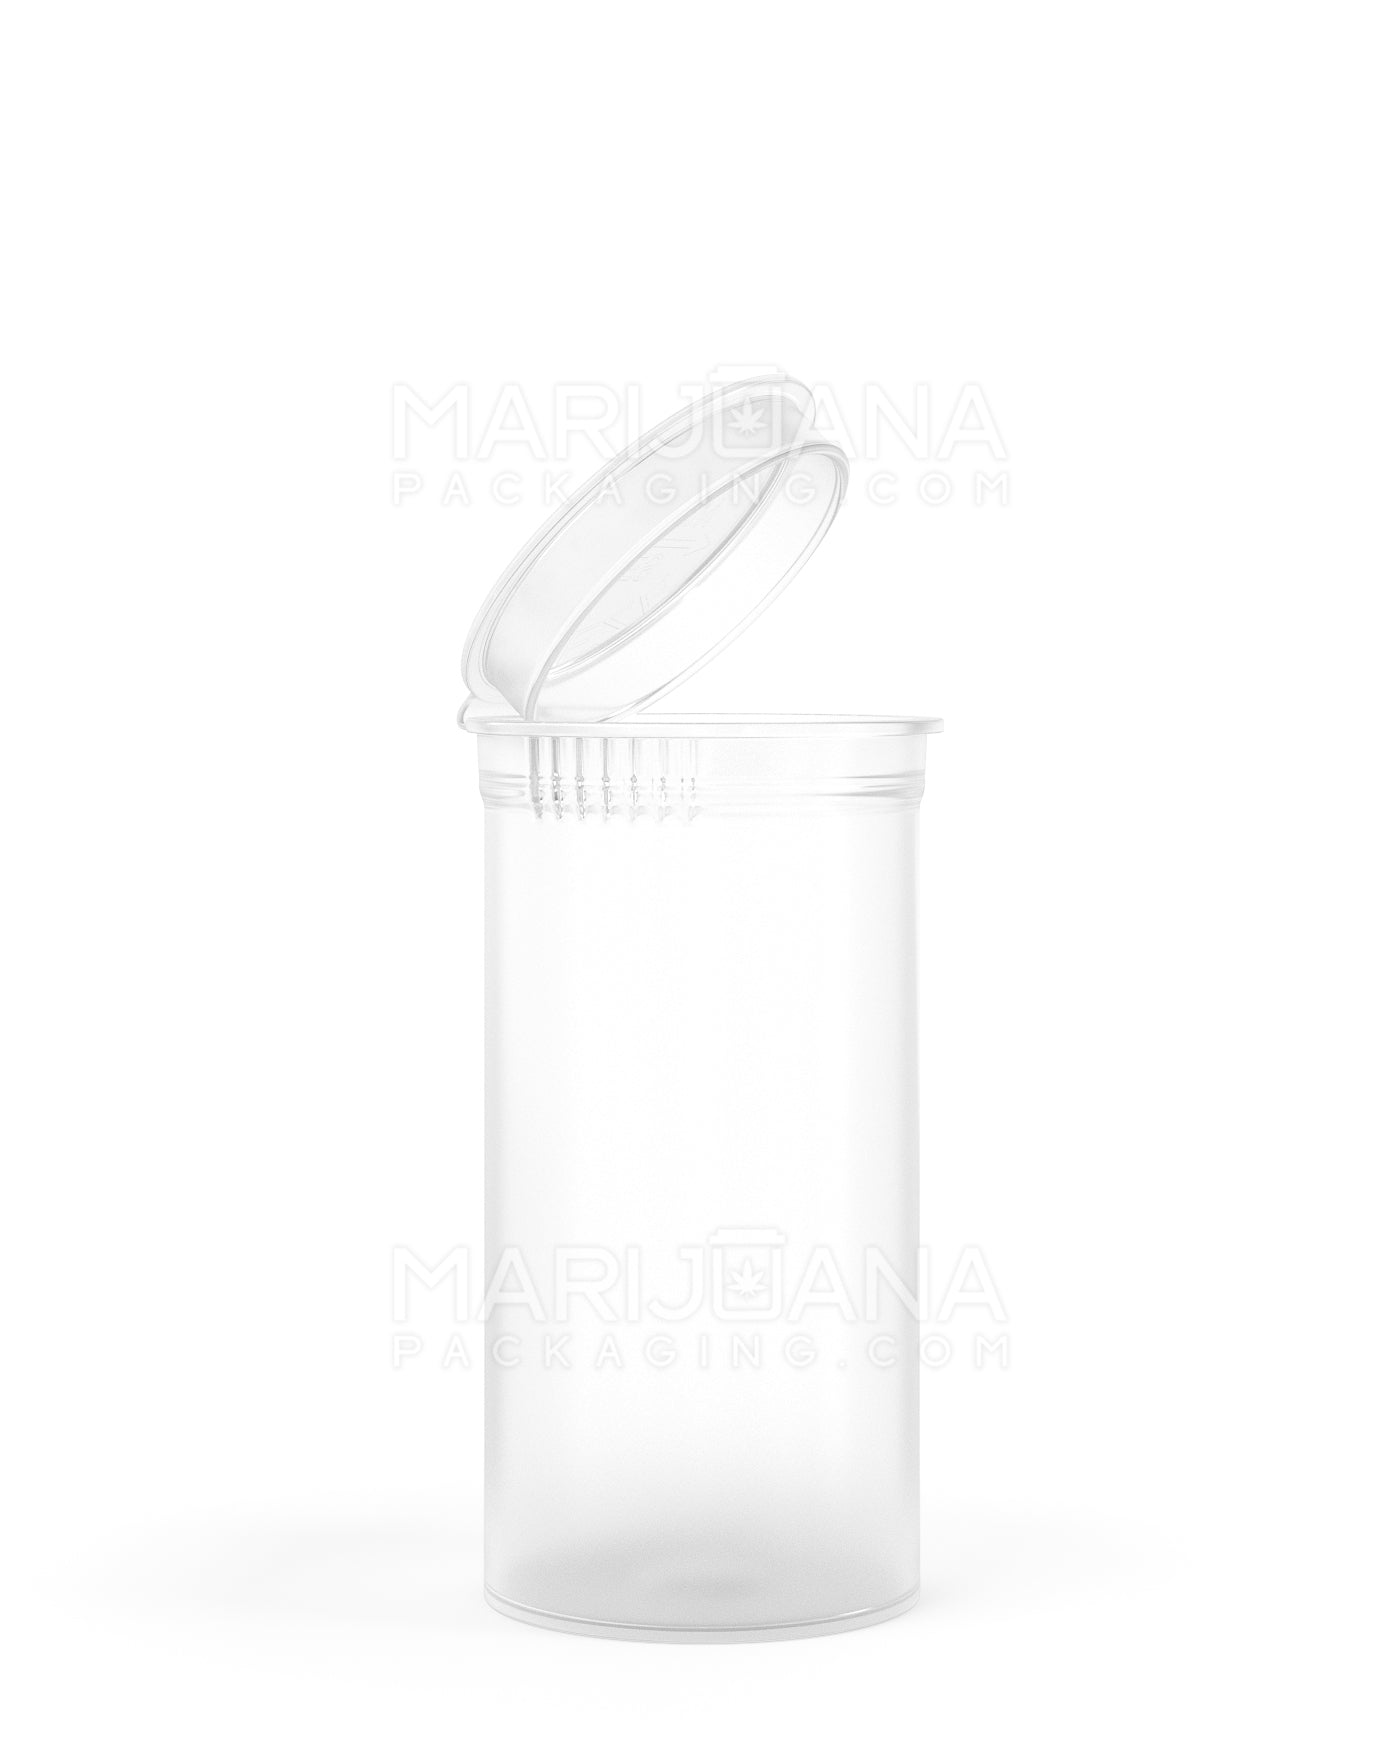 Printed 3.5 Gram Squeezetop Child Resistant Vial Containers, Health &  Wellness